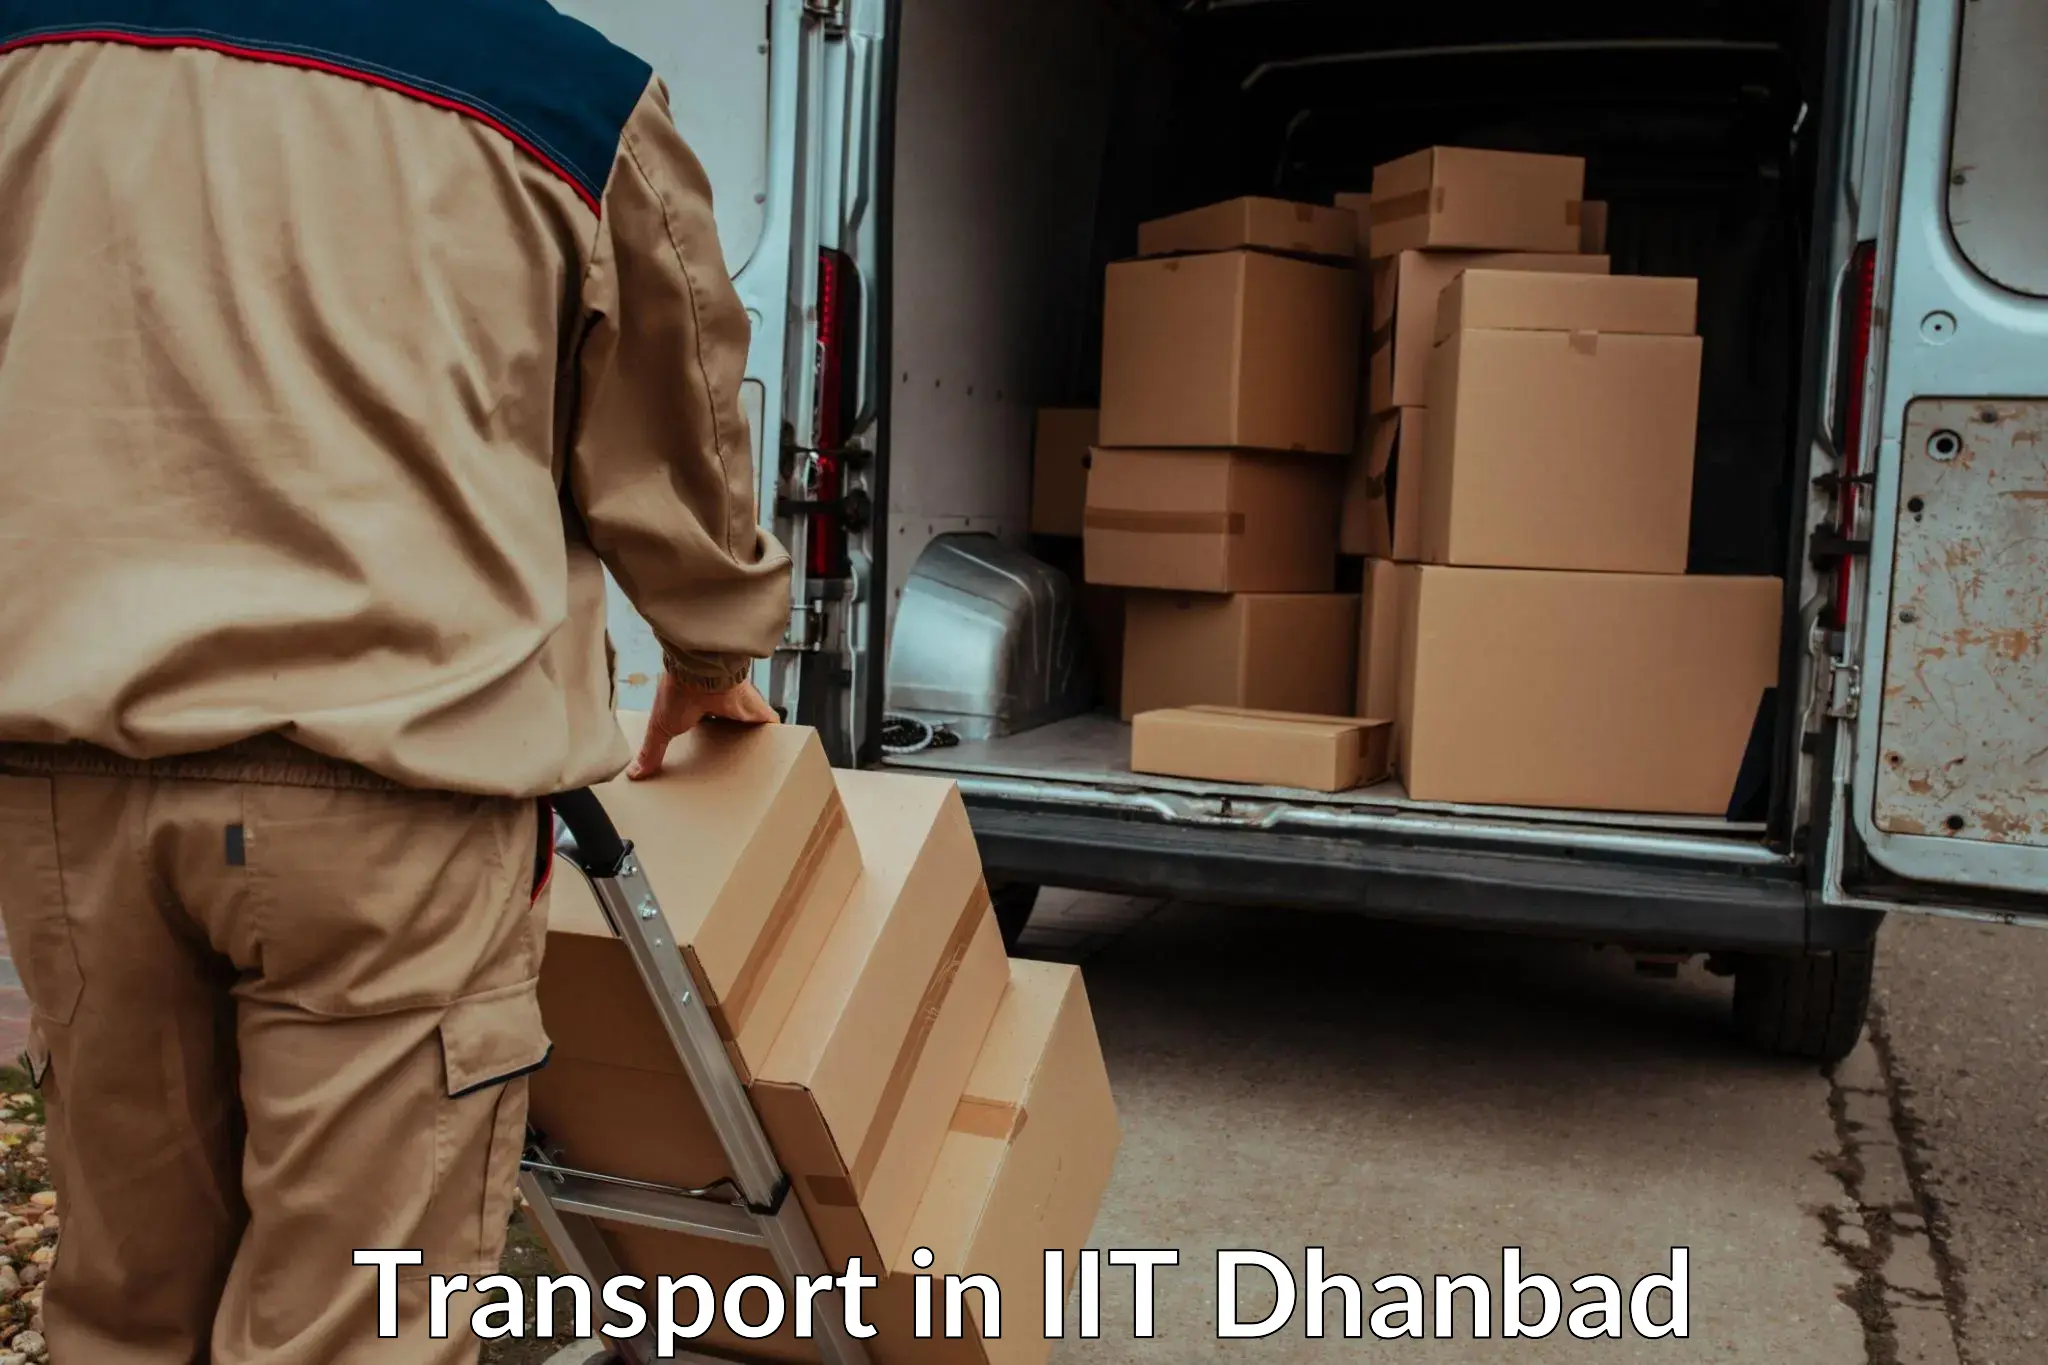 Domestic goods transportation services in IIT Dhanbad